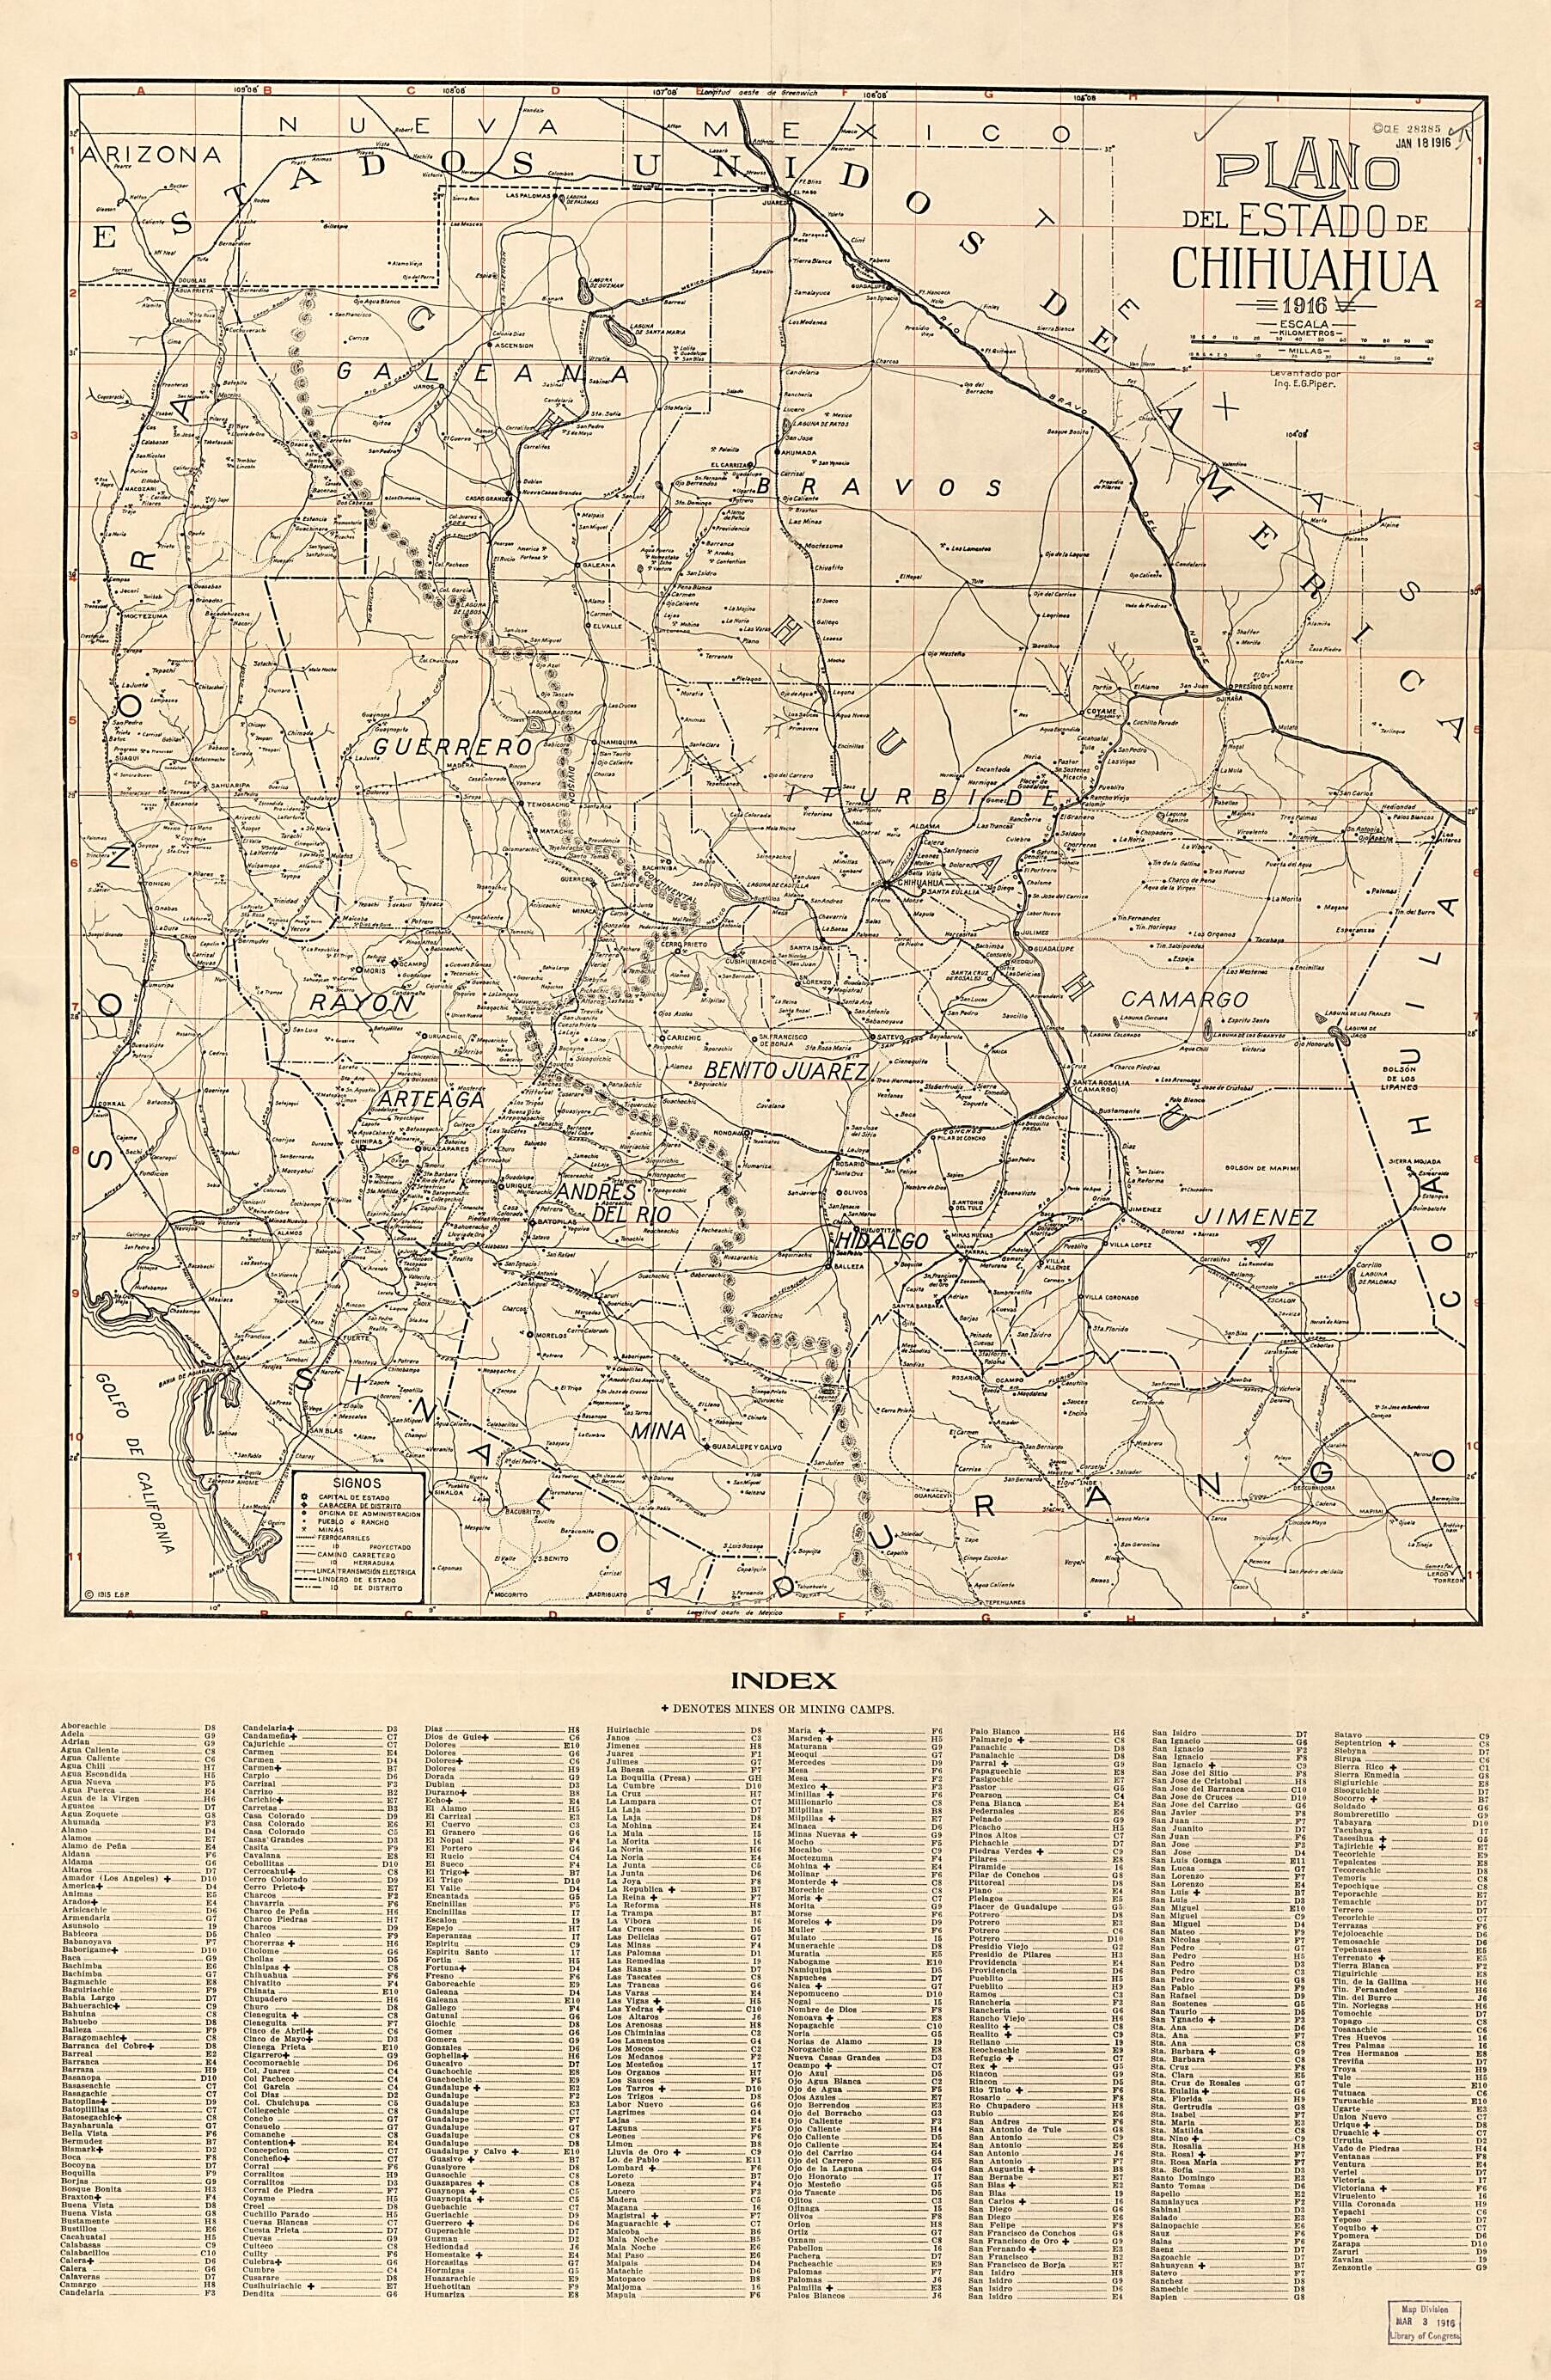 This old map of Plano Del Estado De Chihuahua from 1916 was created by E. G. Piper in 1916